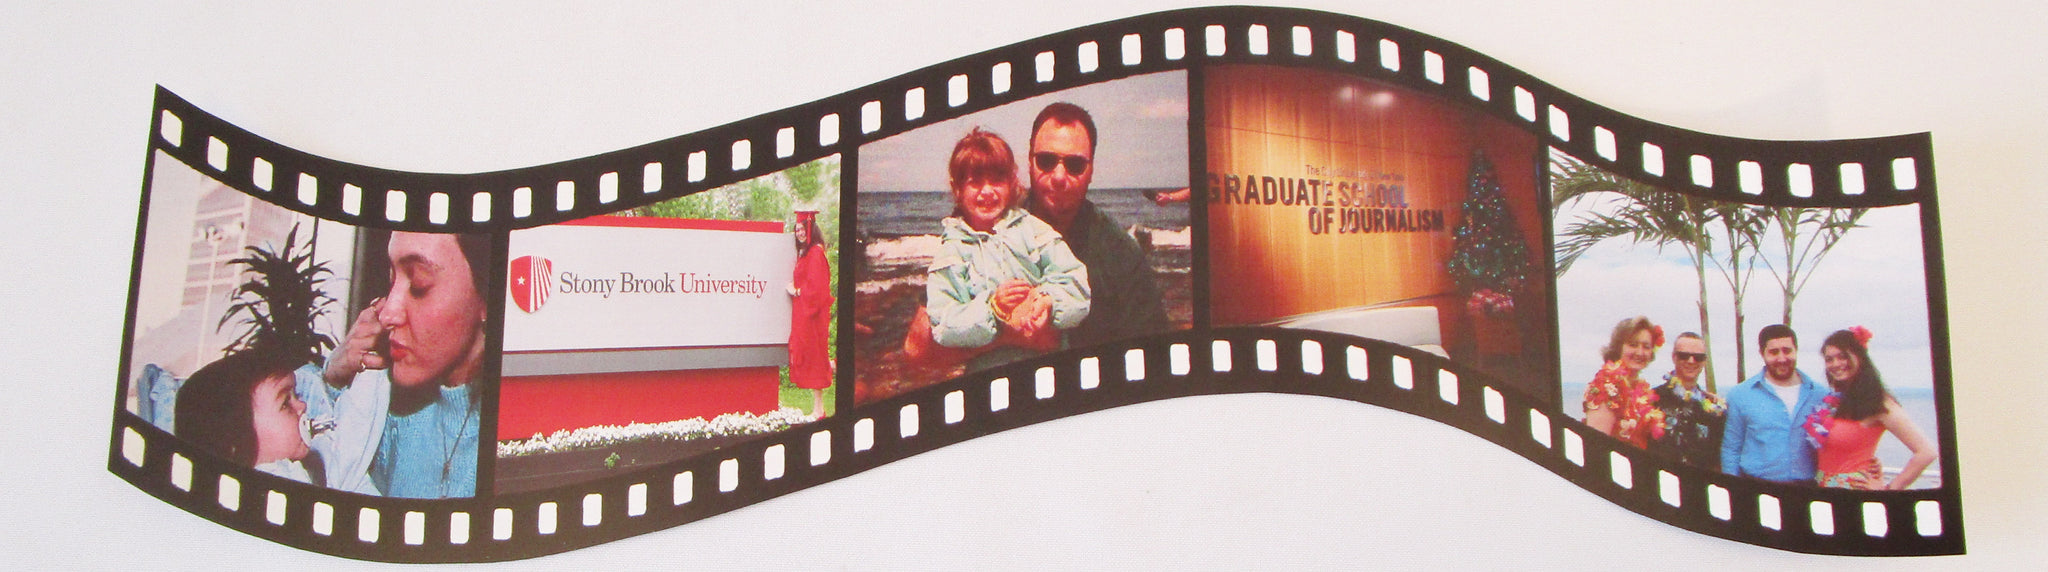 Personalized Filmstrip – Designs by Ginny